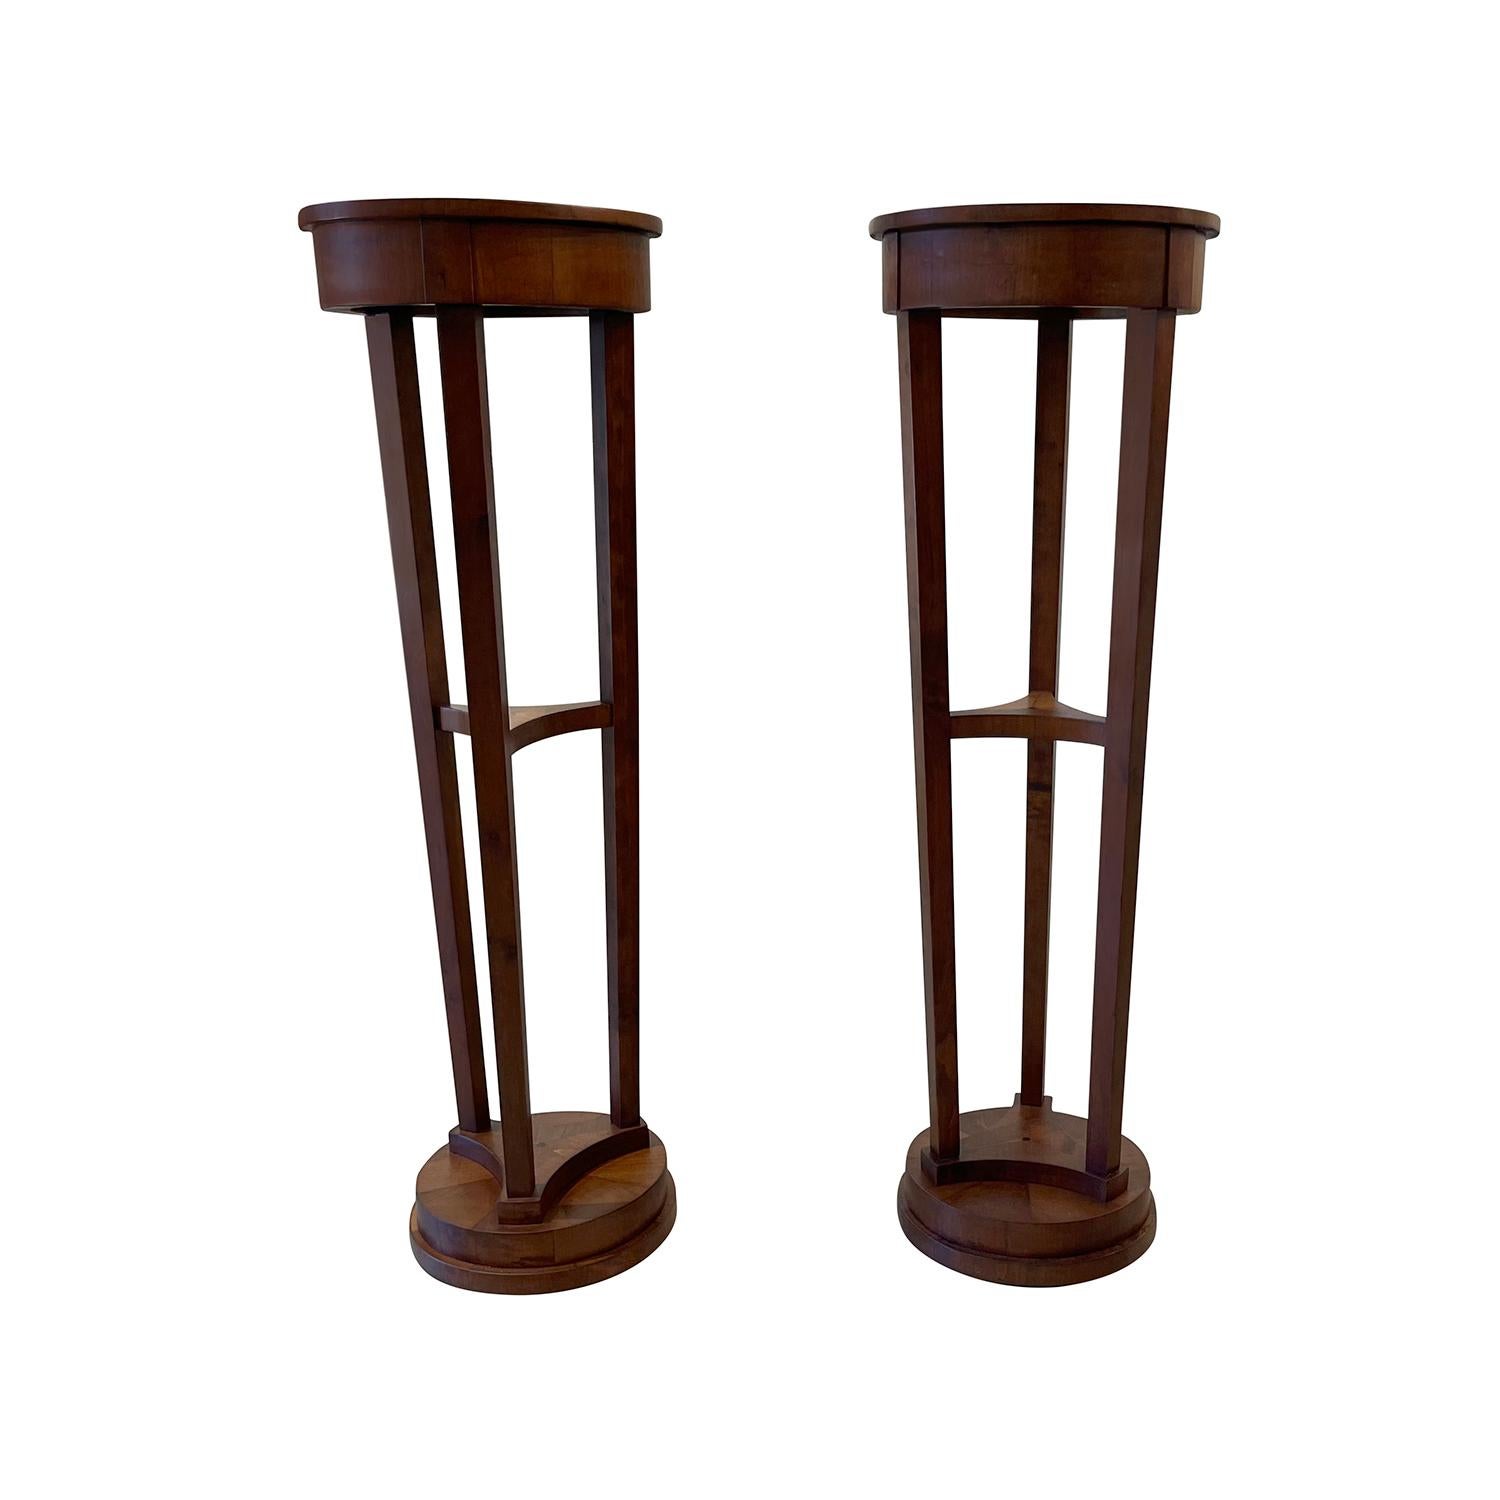 An antique French pair of pedestals-torchers made of hand crafted Mahogany, in good condition. Each of the detailed Parisian shellac polished podiums are composed with a small centre shelf, enhanced by detailed wood carvings. The living room décor